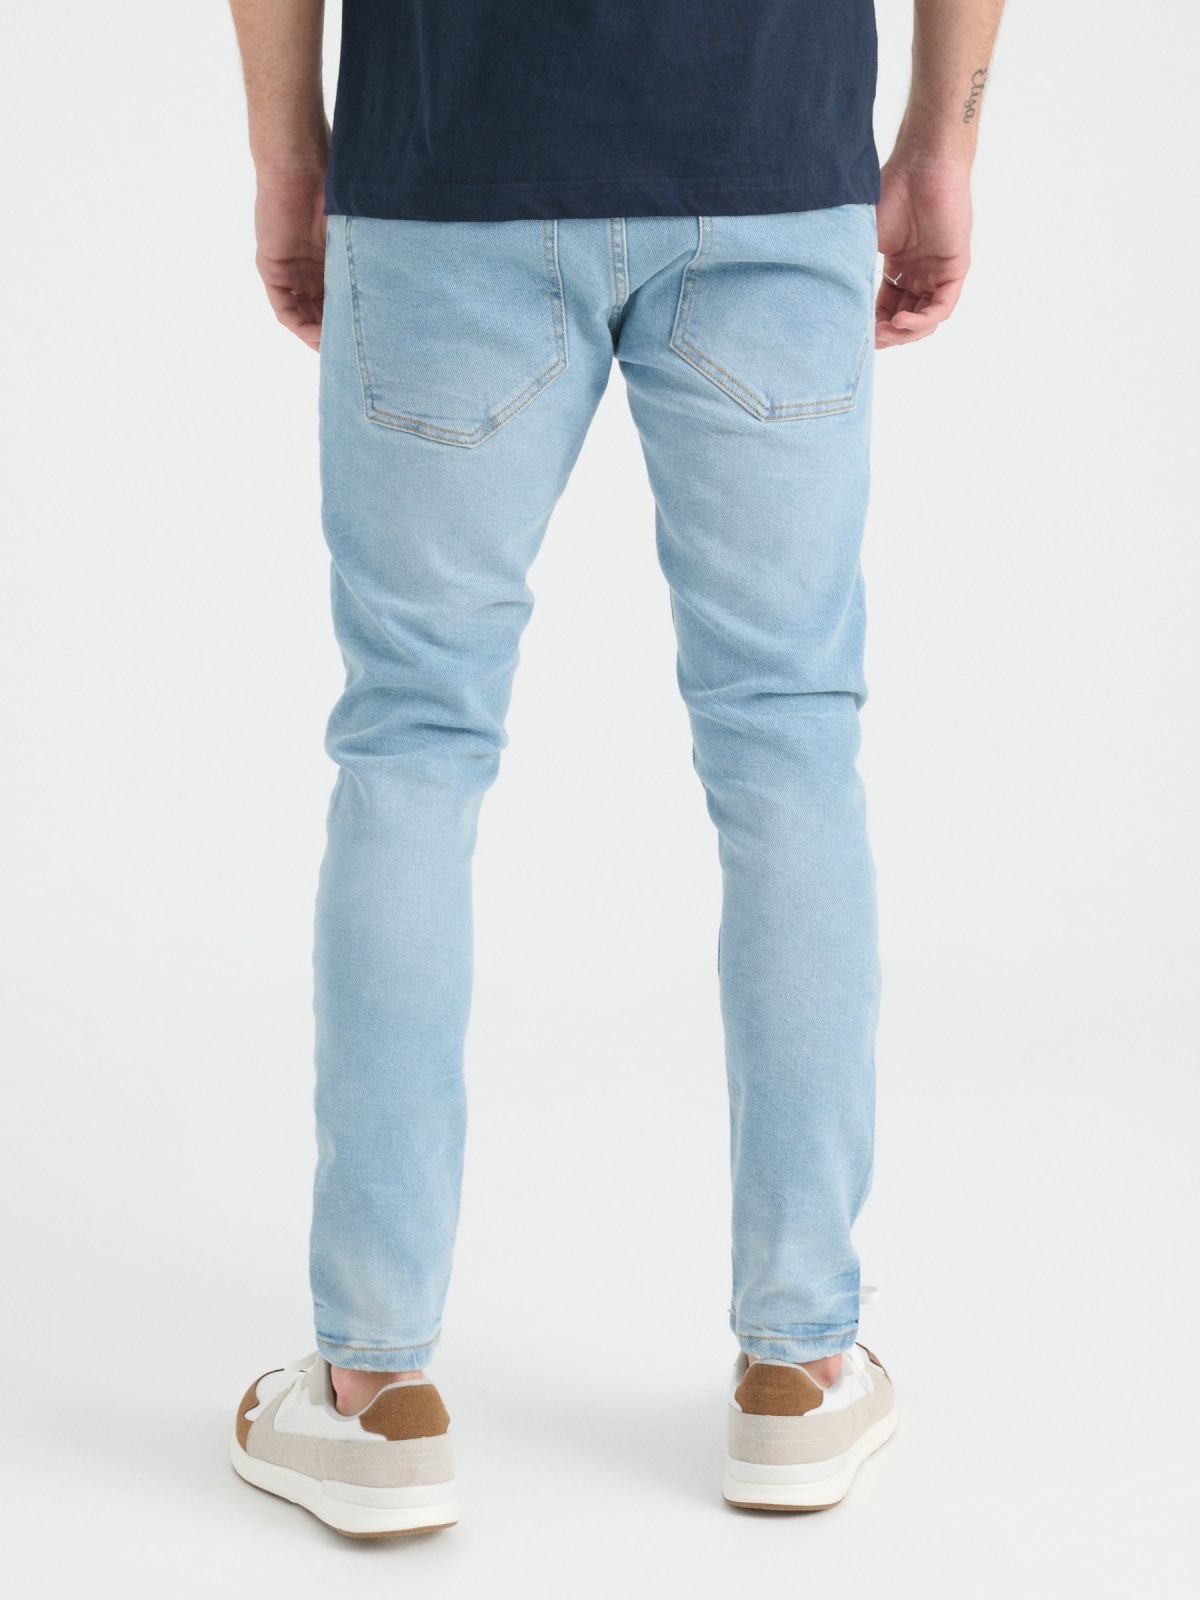 Ripped washed super slim jeans light blue middle back view